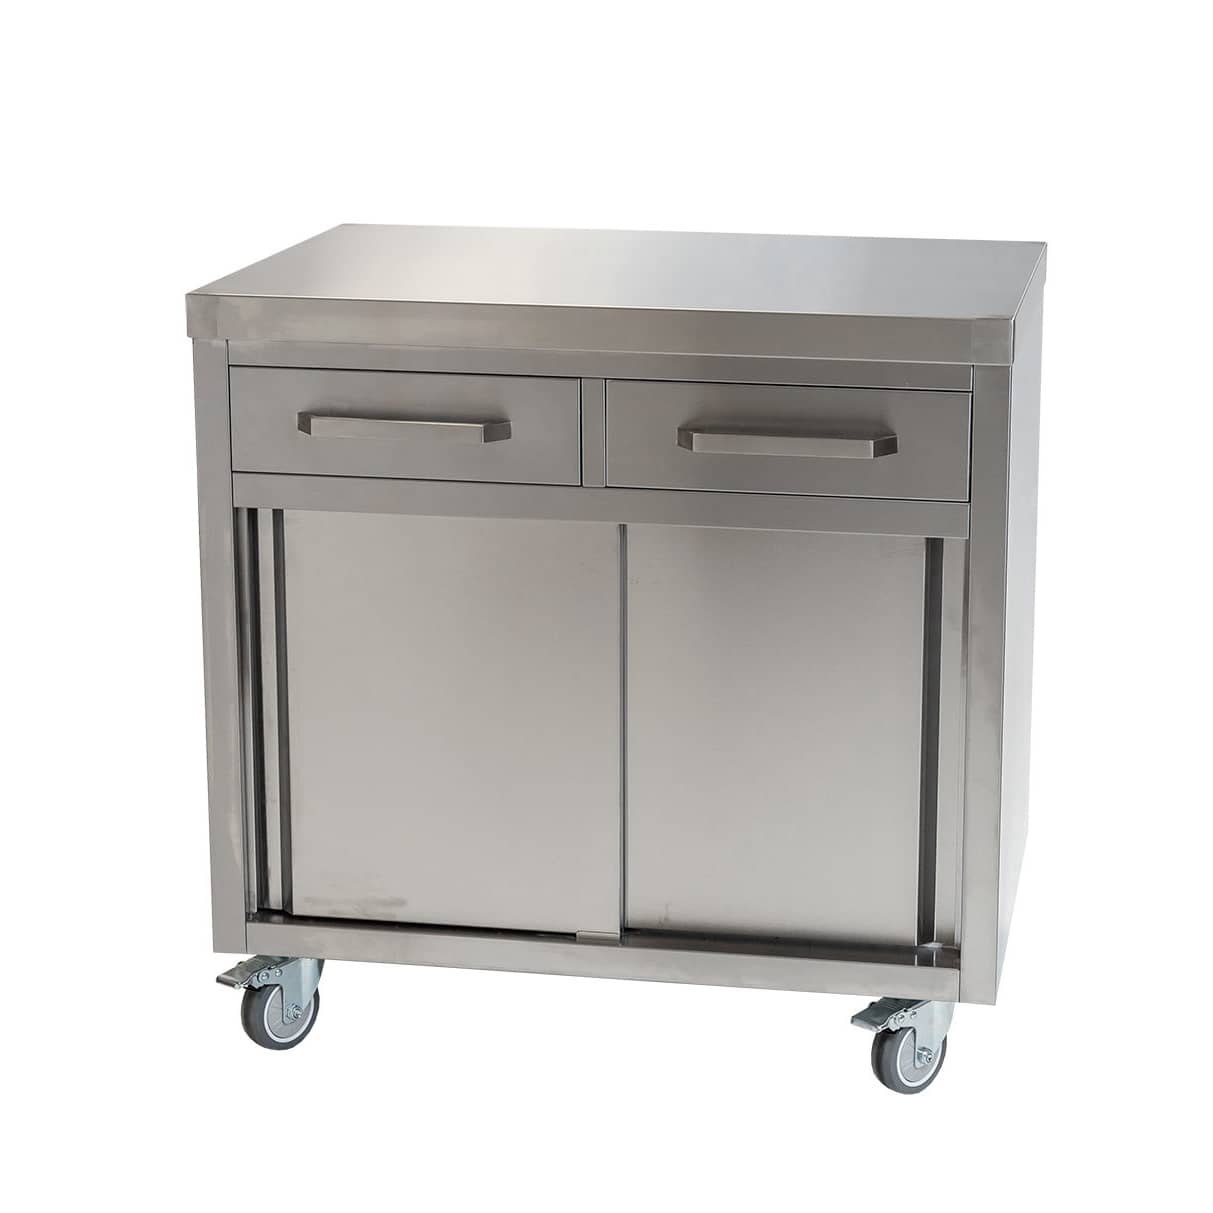 Stainless Cabinet, 900 x 610 x 900mm high